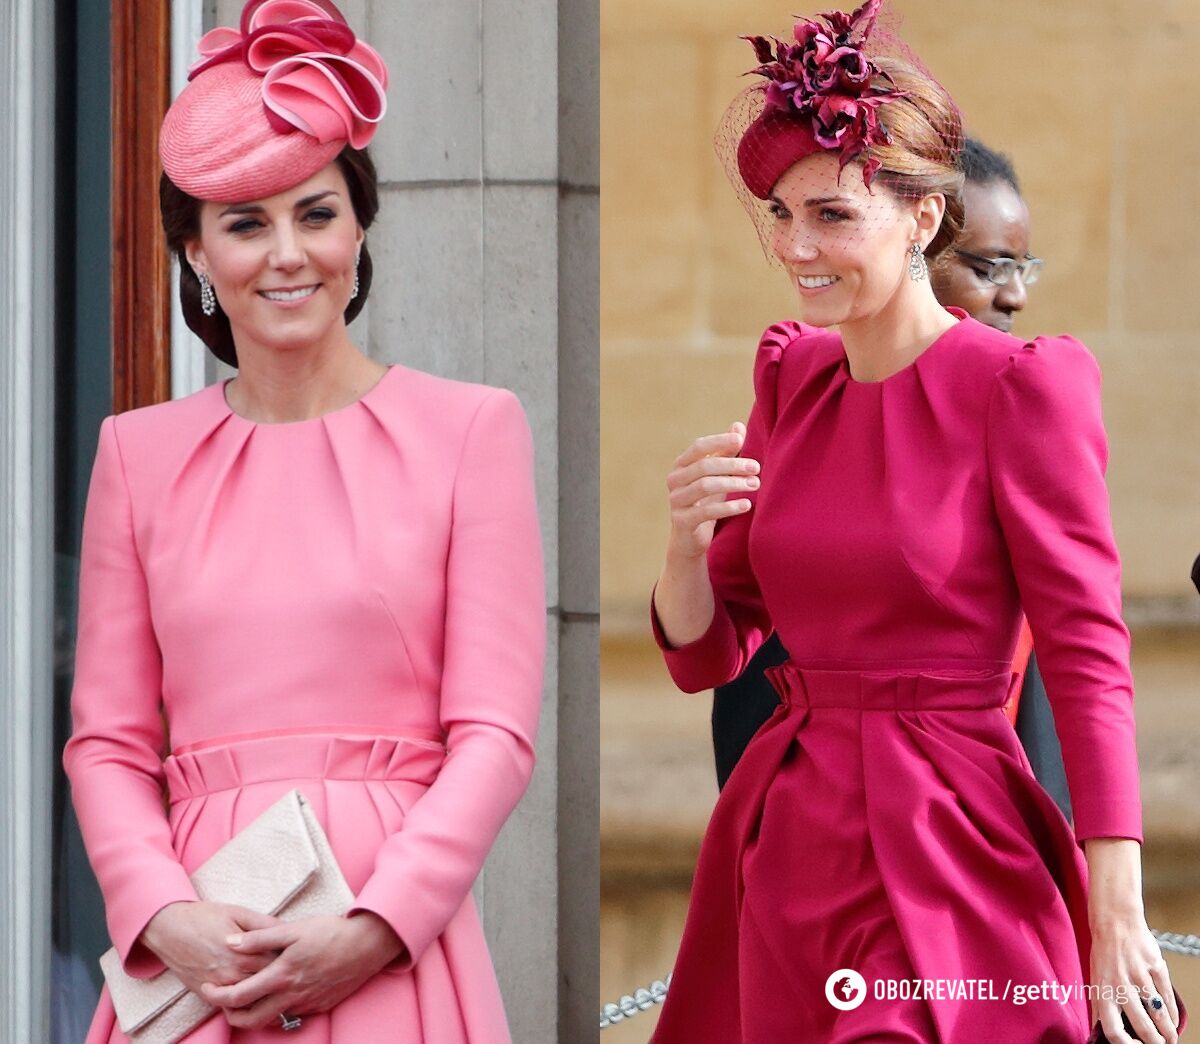 You didn't even notice: 5 times Kate Middleton wore identical outfits in different colors. Photo